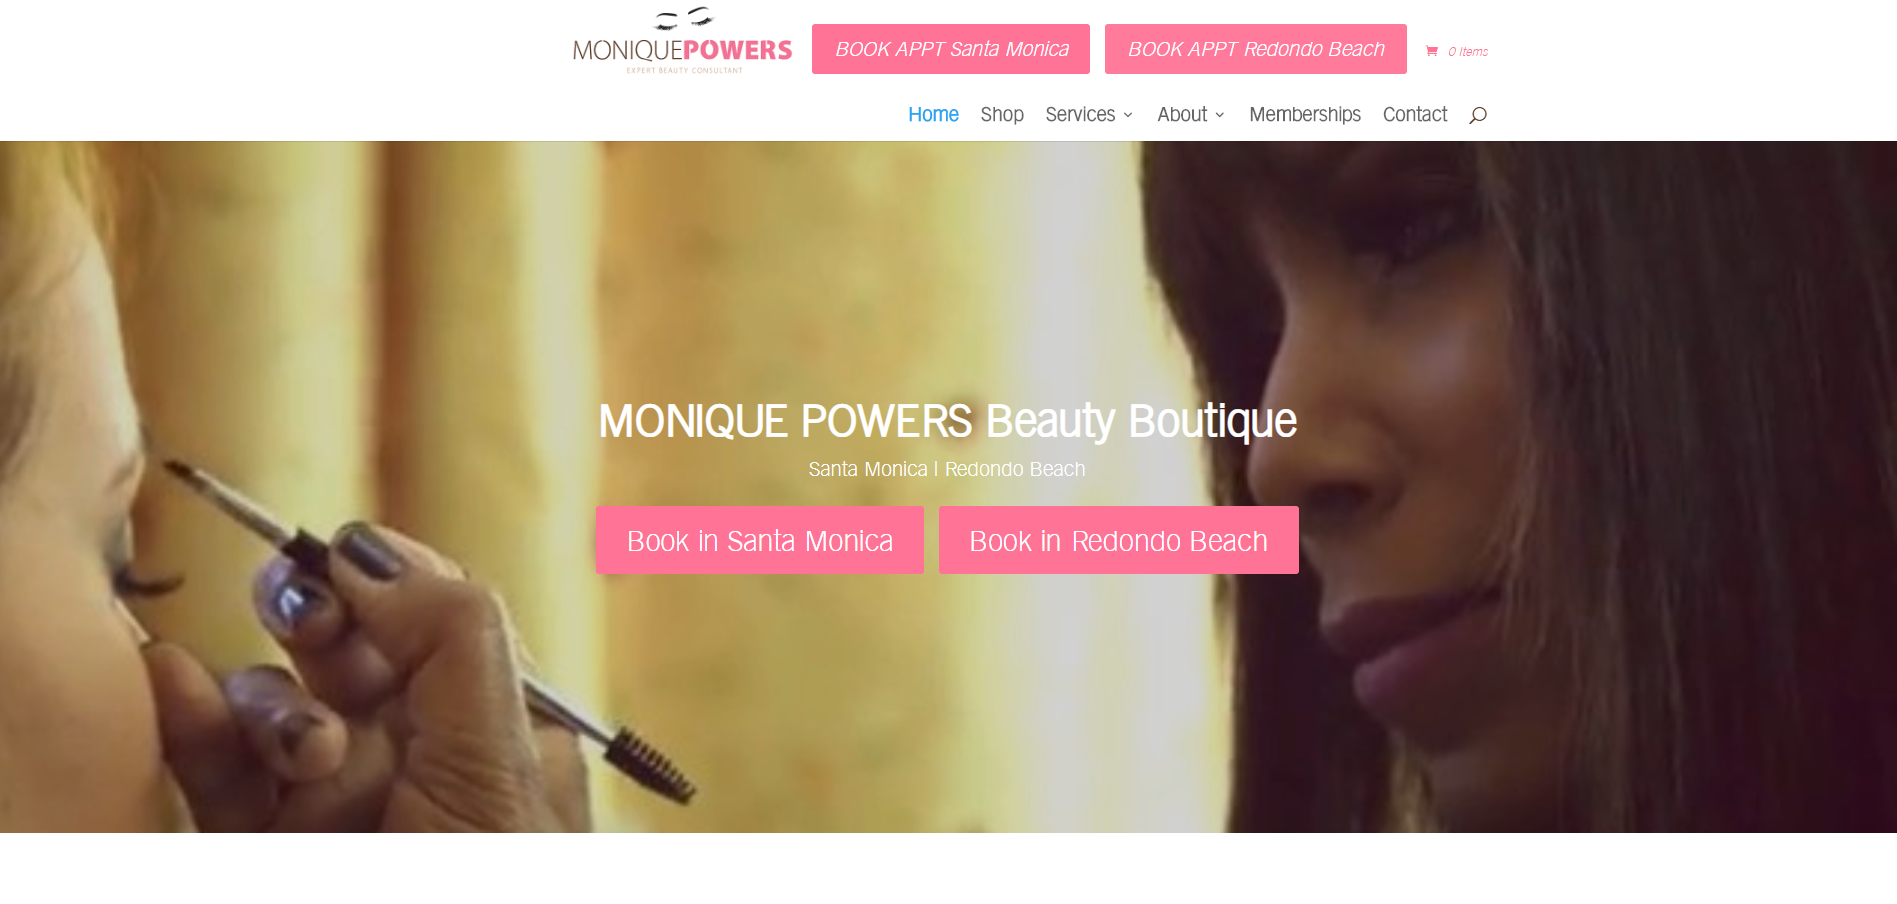 Monique Powers, International Makeup Artist and Eyebrow Specialist Launches New E-Commerce Website